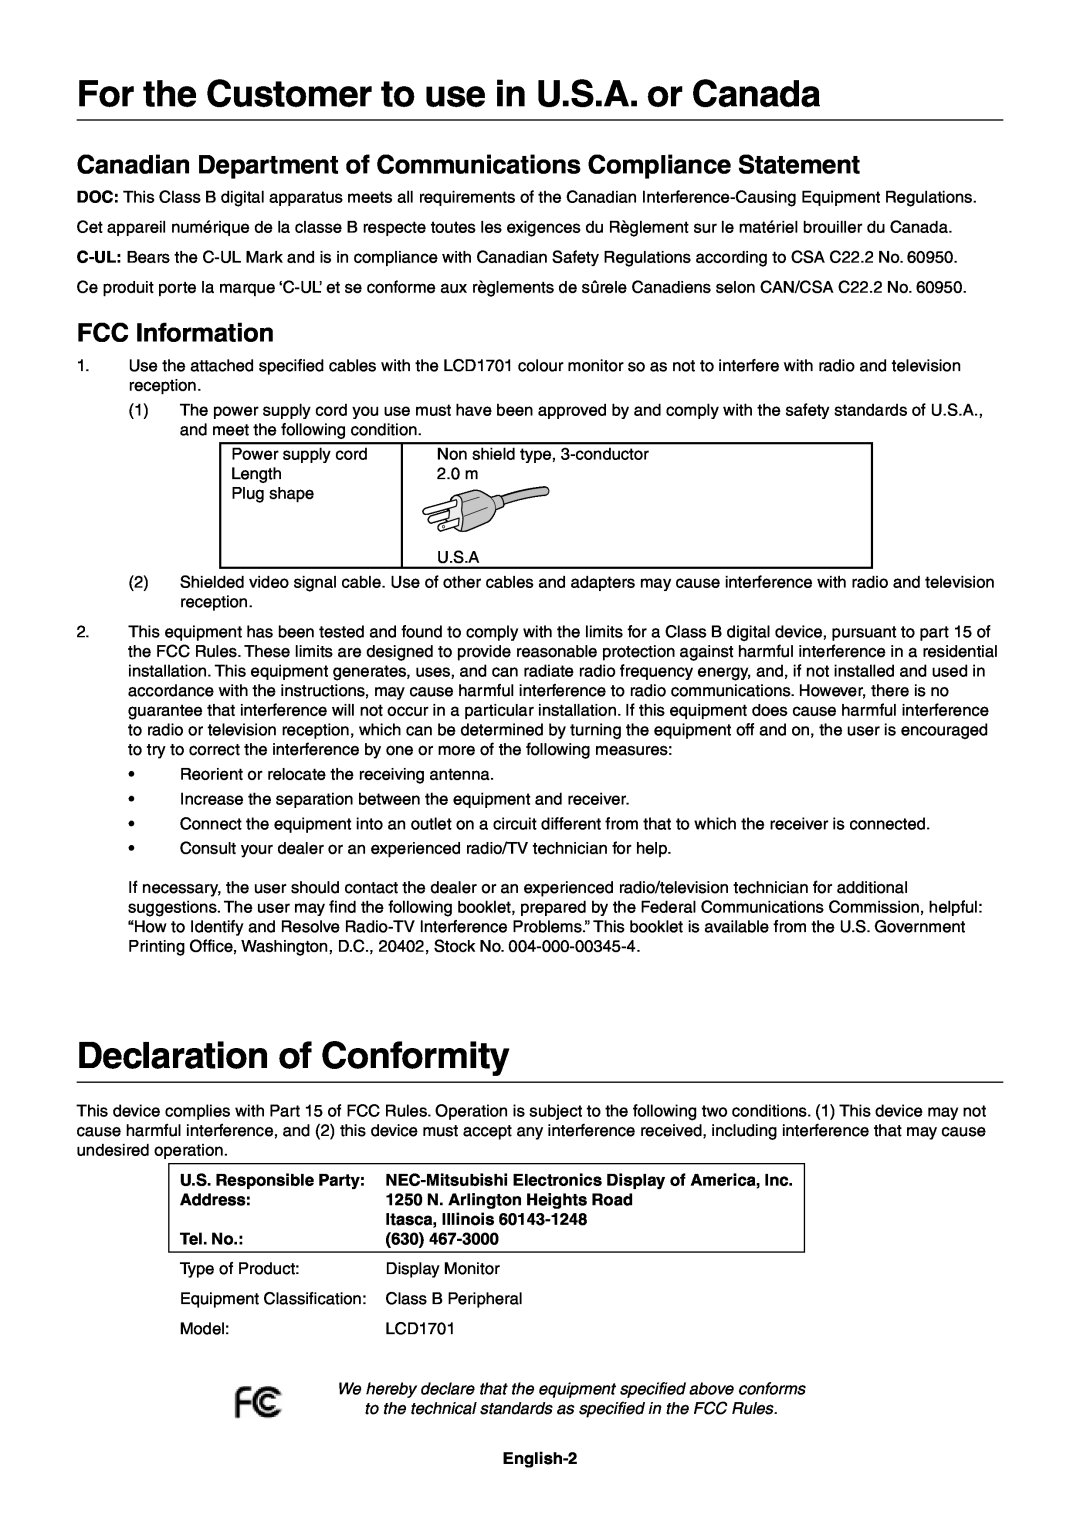 NEC LCD1701 user manual For the Customer to use in U.S.A. or Canada, Declaration of Conformity, FCC Information 